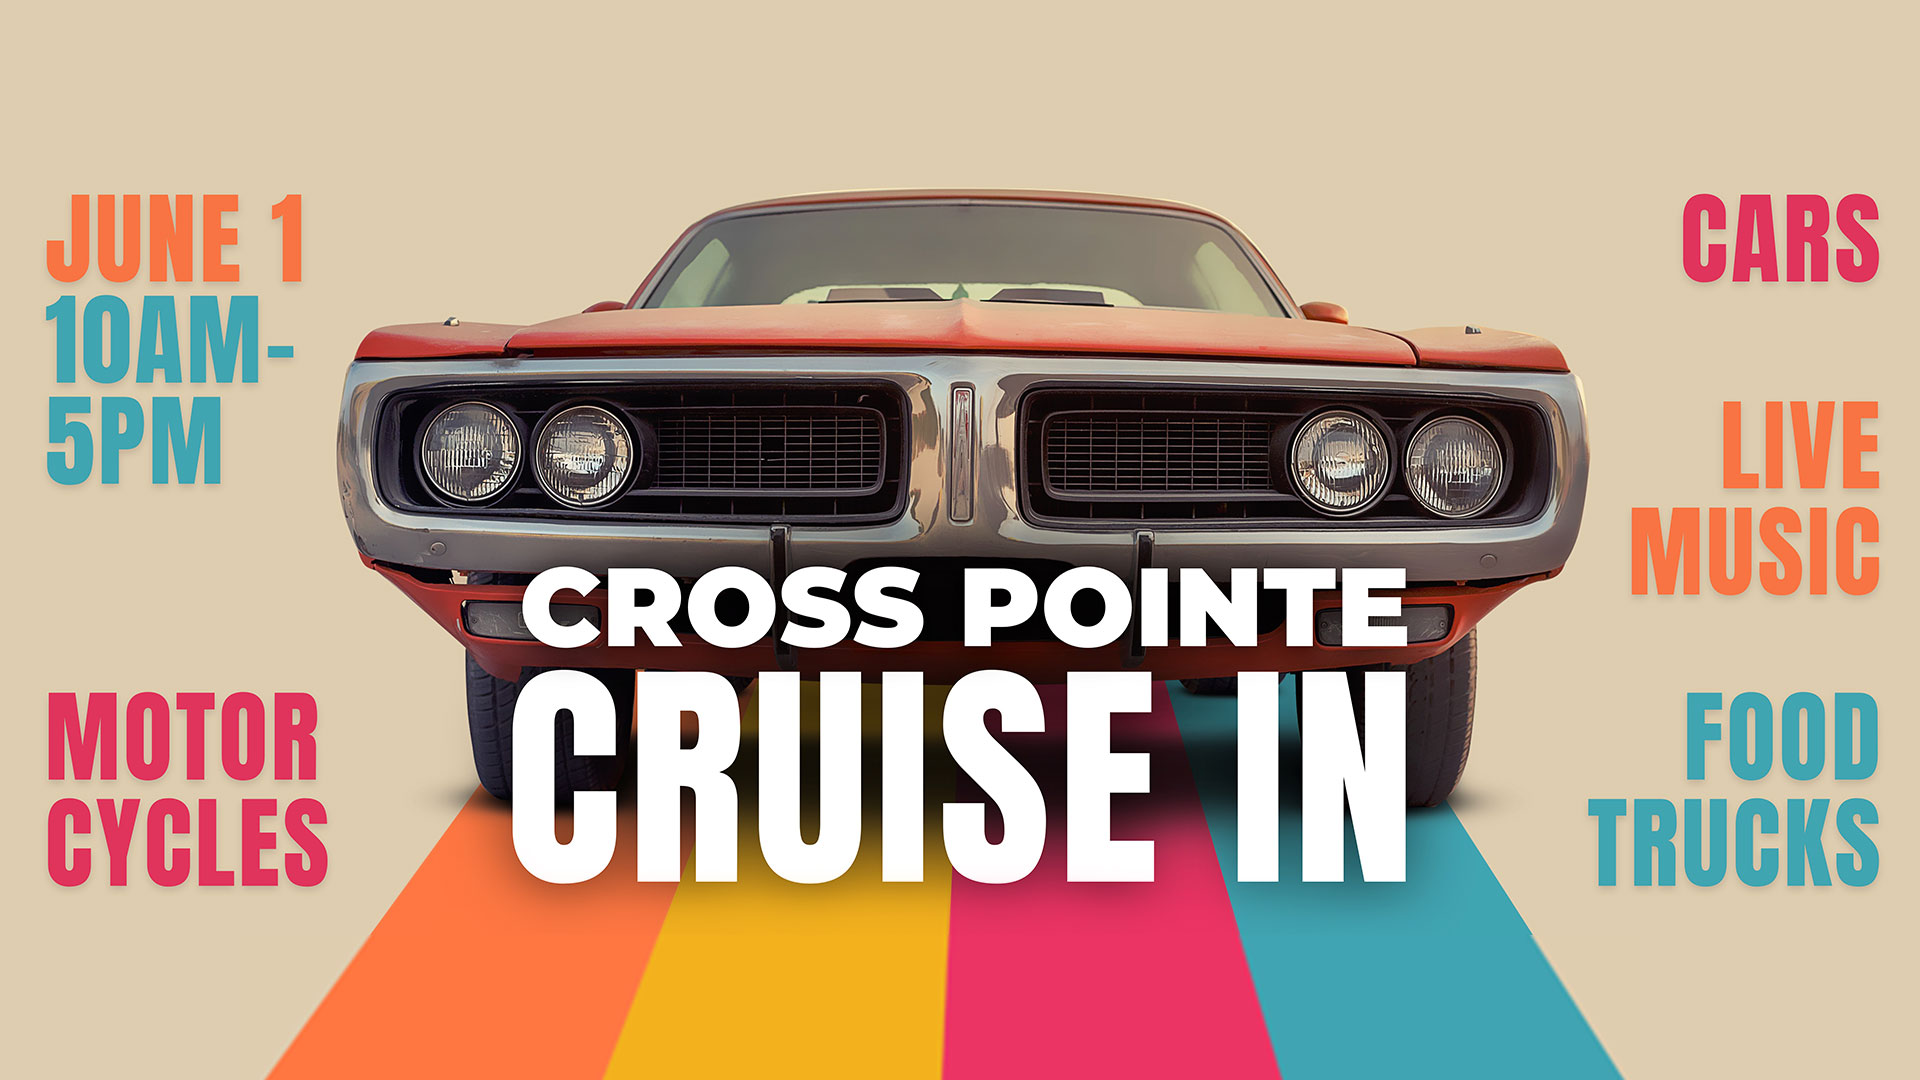 Cross Pointe Cruise In